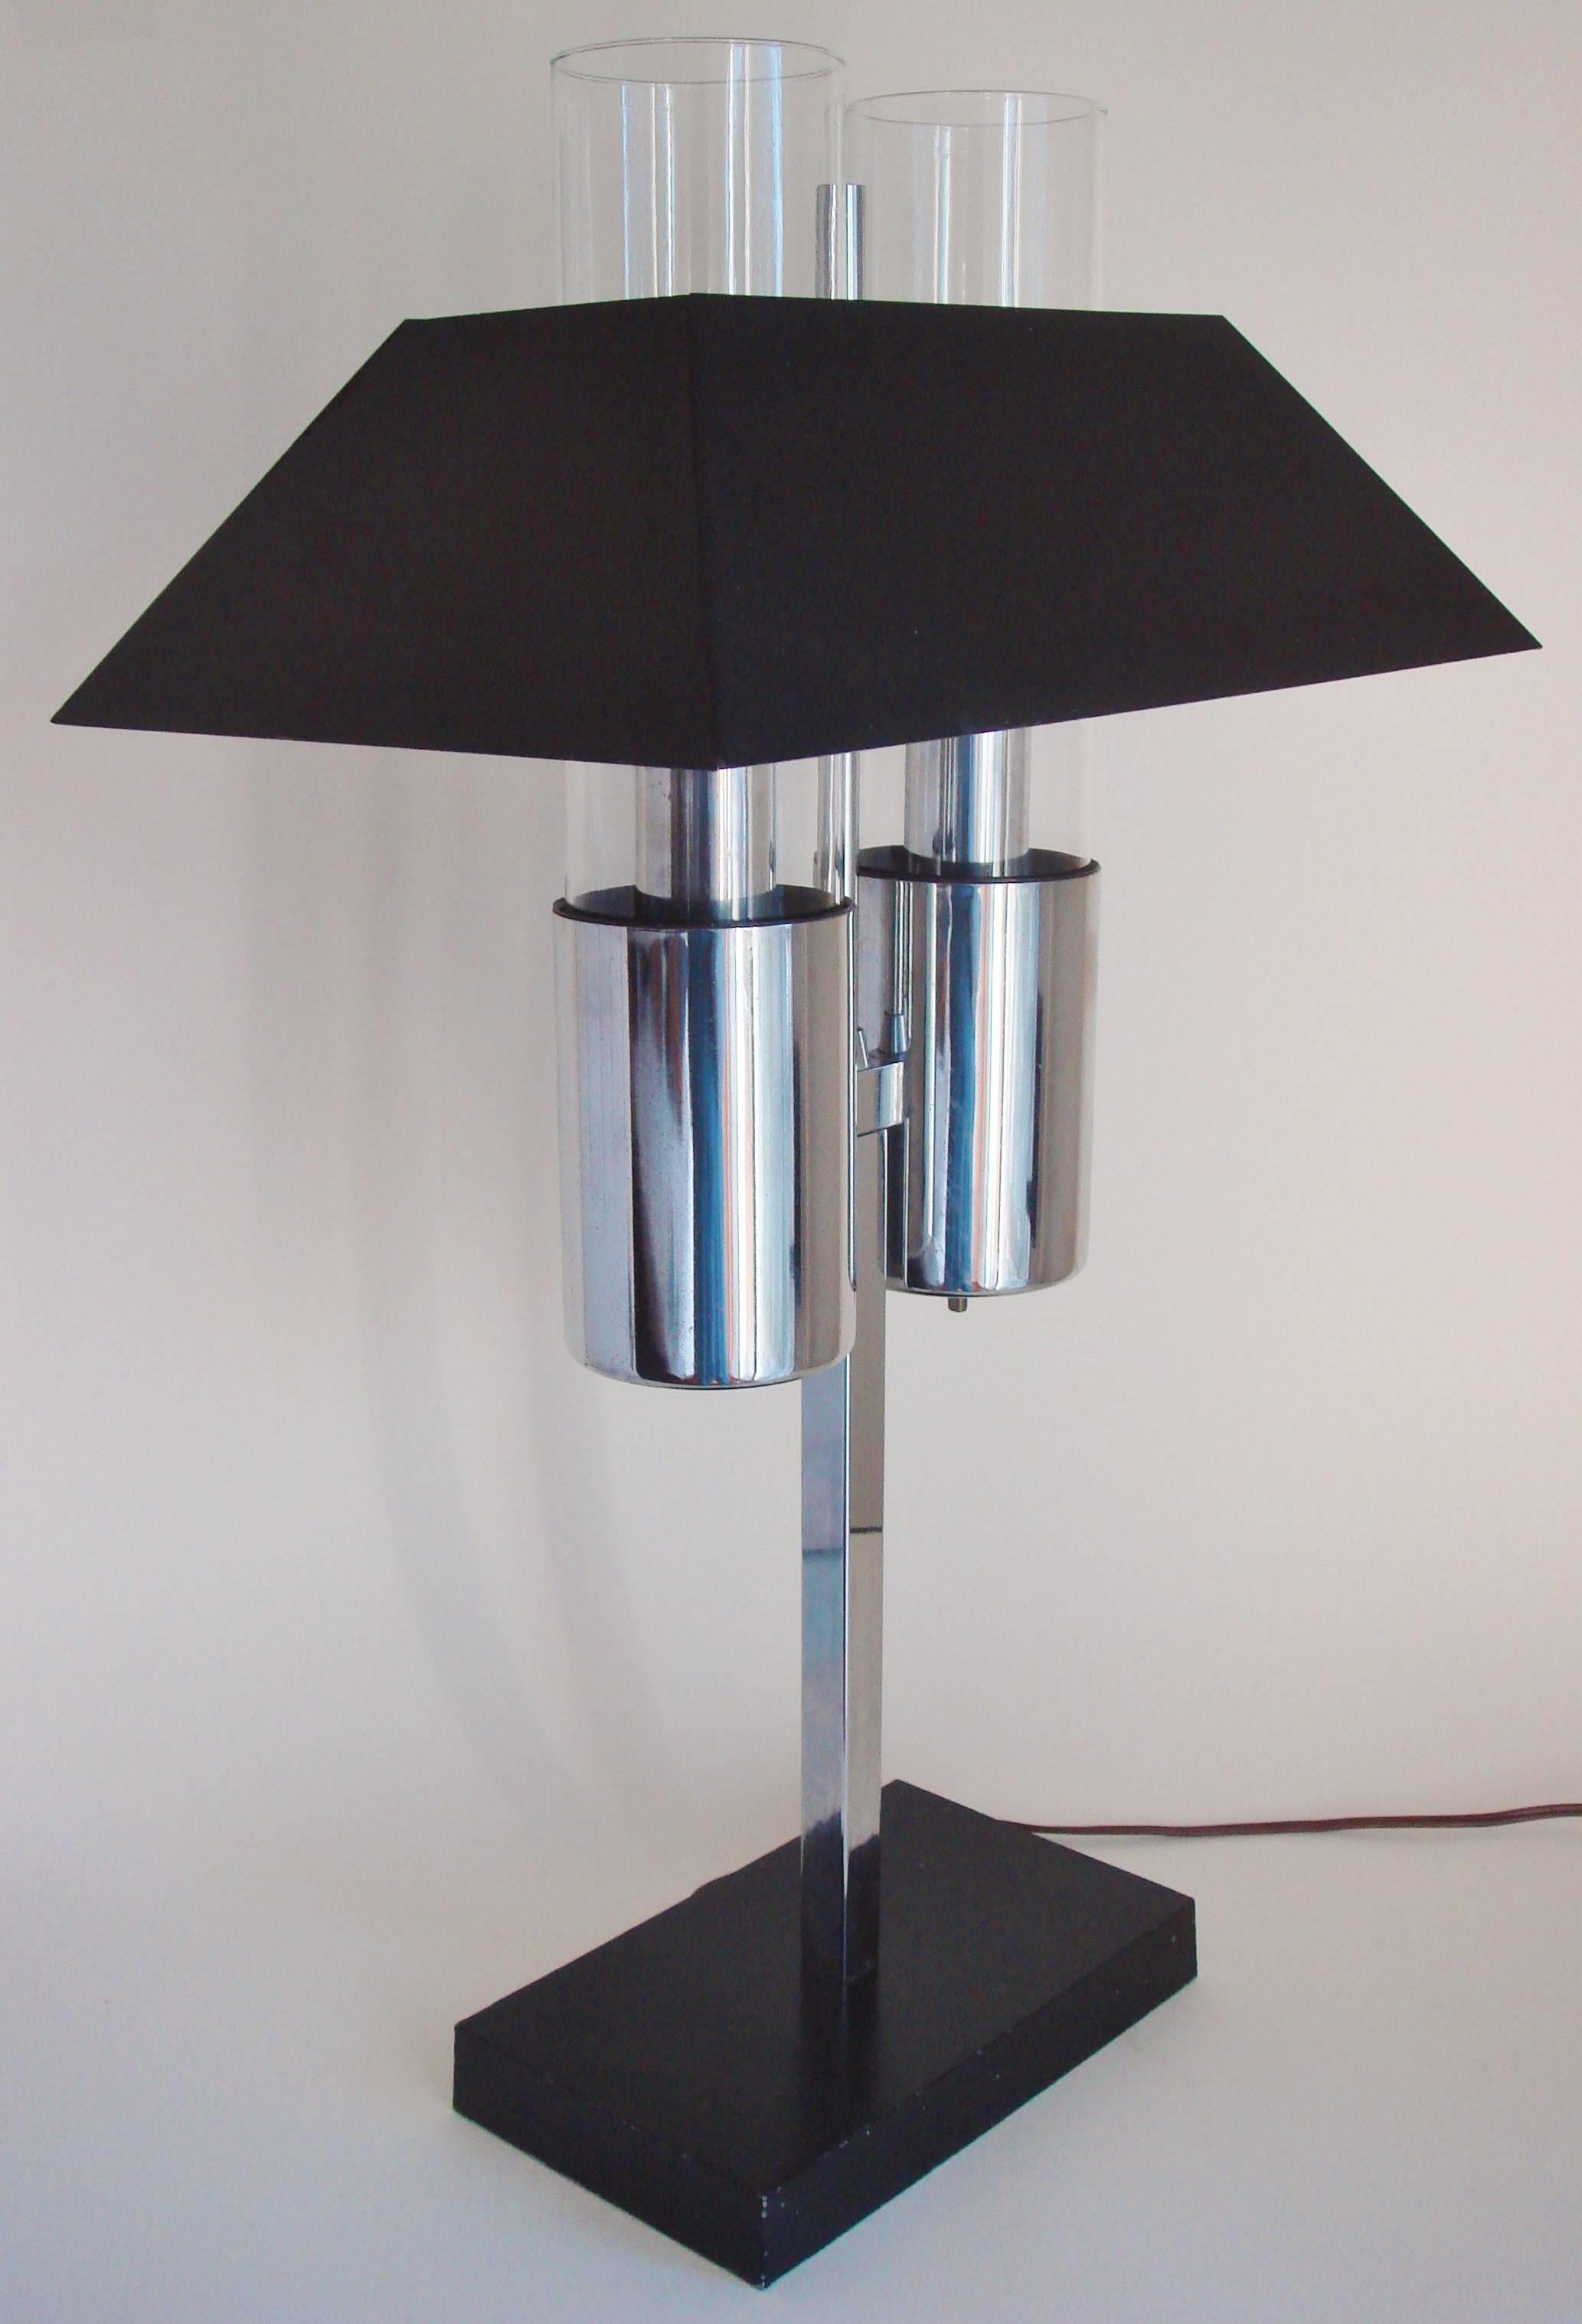 This stunning large American Mid-Century Modern twin bulb banker's lamp features a chrome body with a black enameled shade and base with twin glass chimneys for each black plastic lined bulb socket. This lamp was a product of the company Raymor who